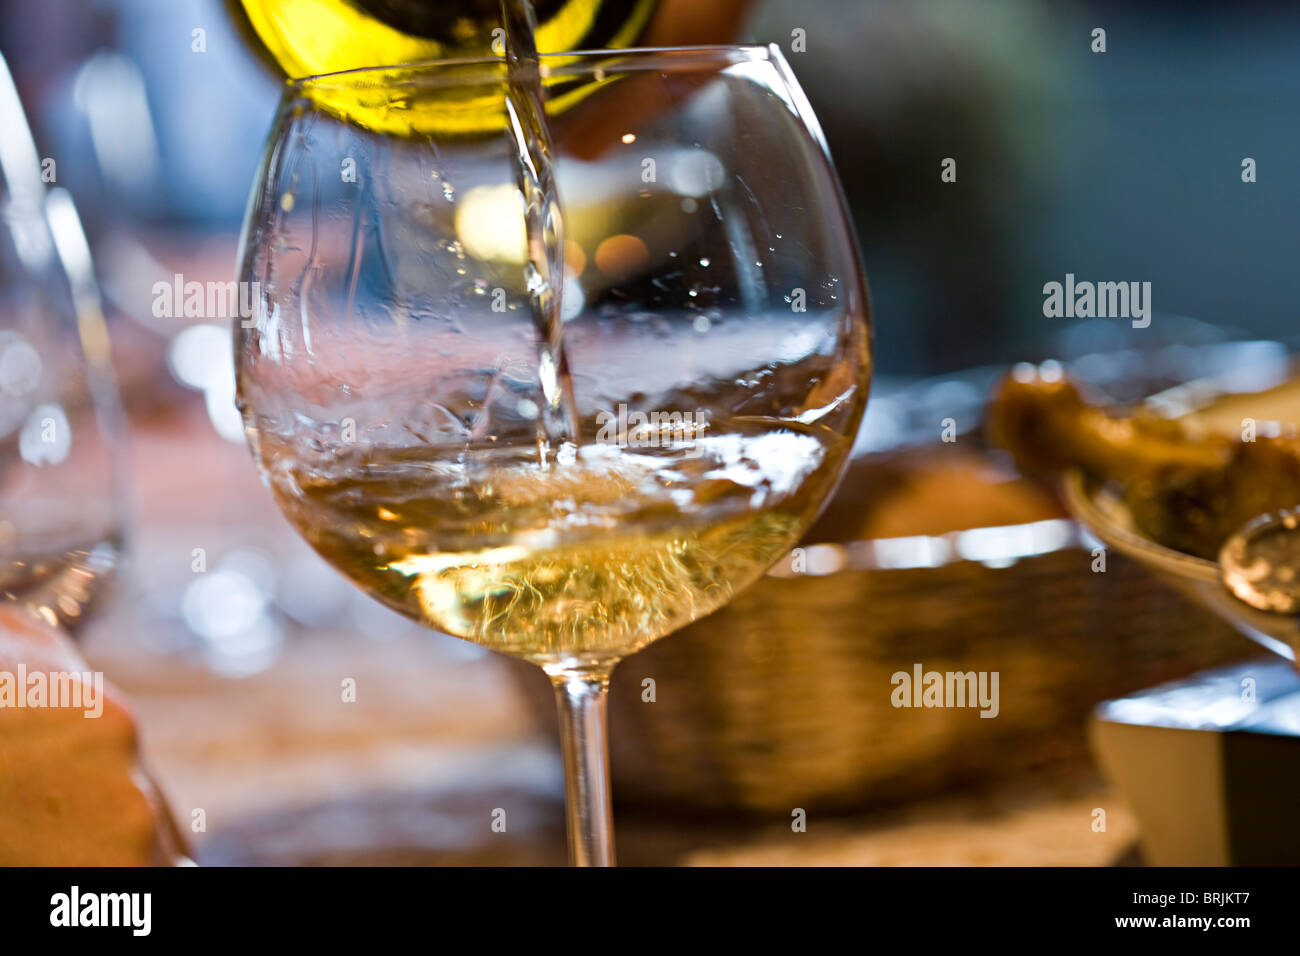 Pouring glass of white wine Stock Photo